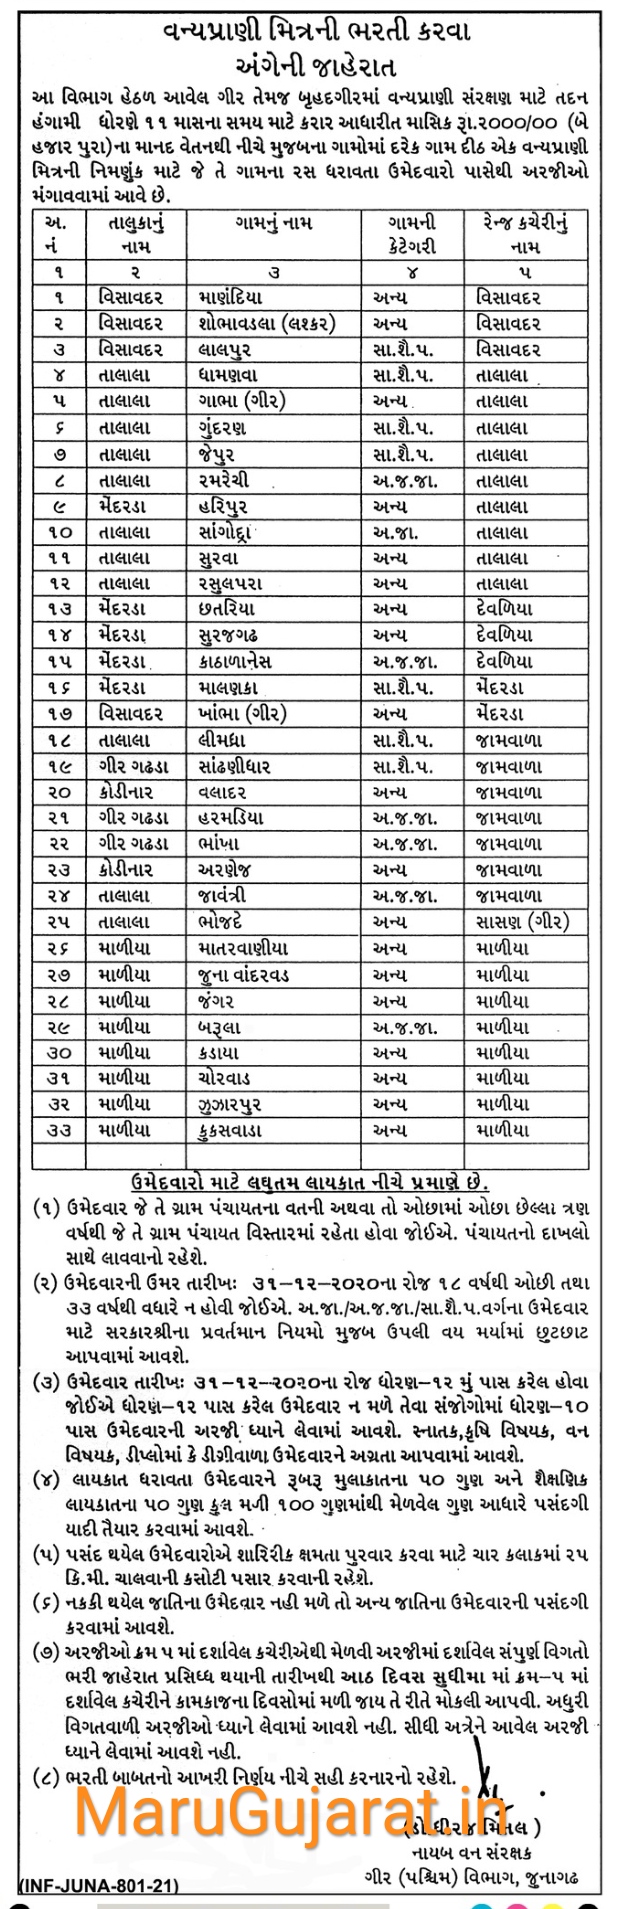 Geer Forest Department Recruitment For 33 Post